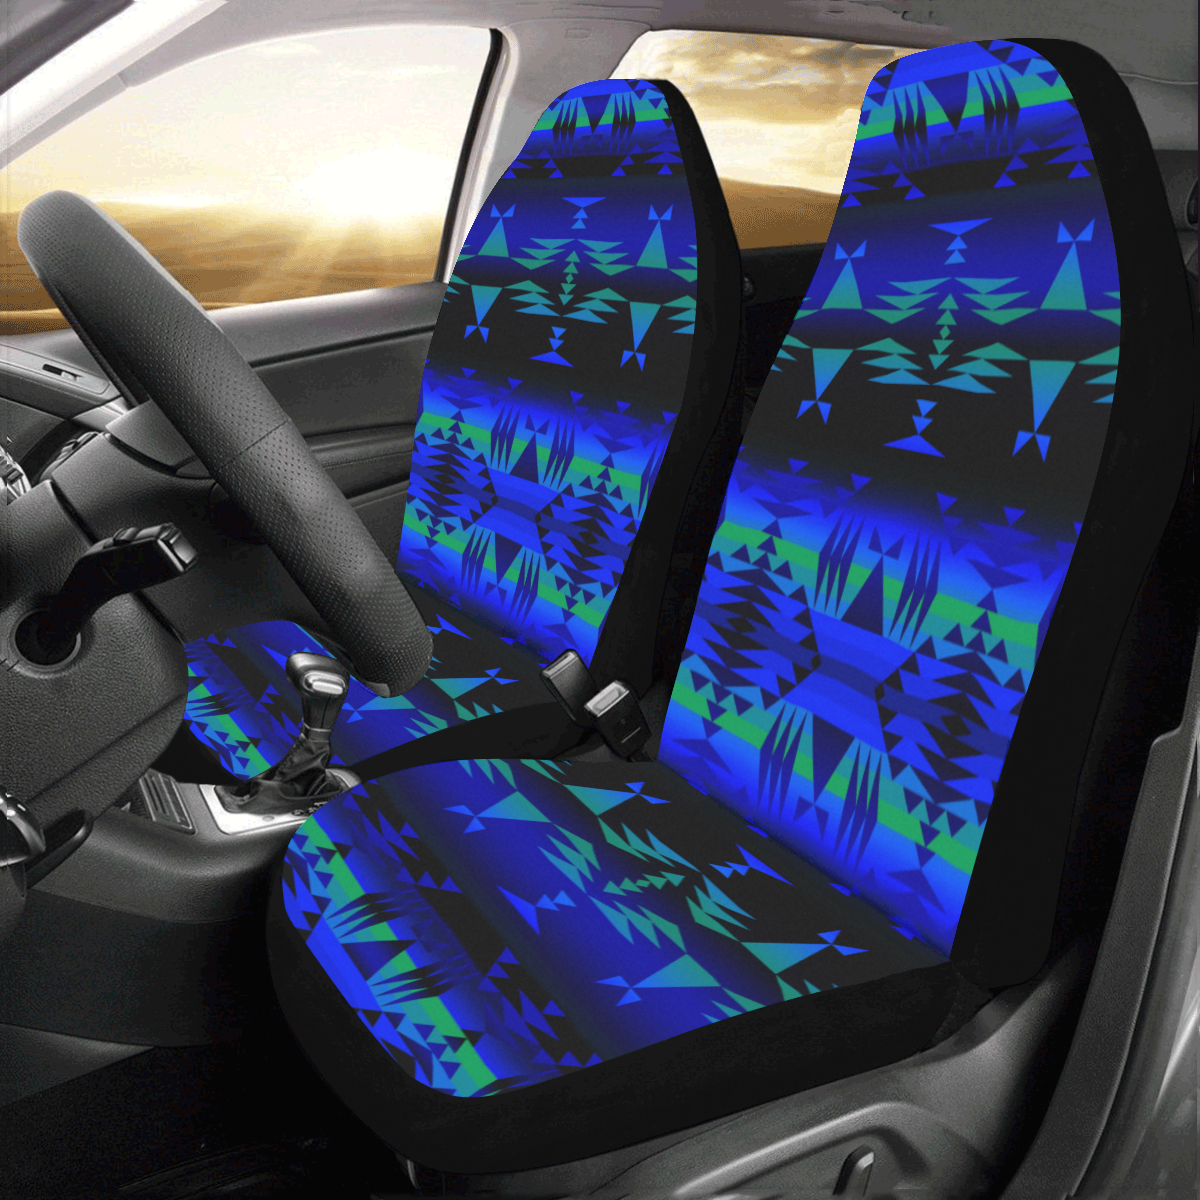 Between the Blue Ridge Mountains Seat Covers (Set of 2)